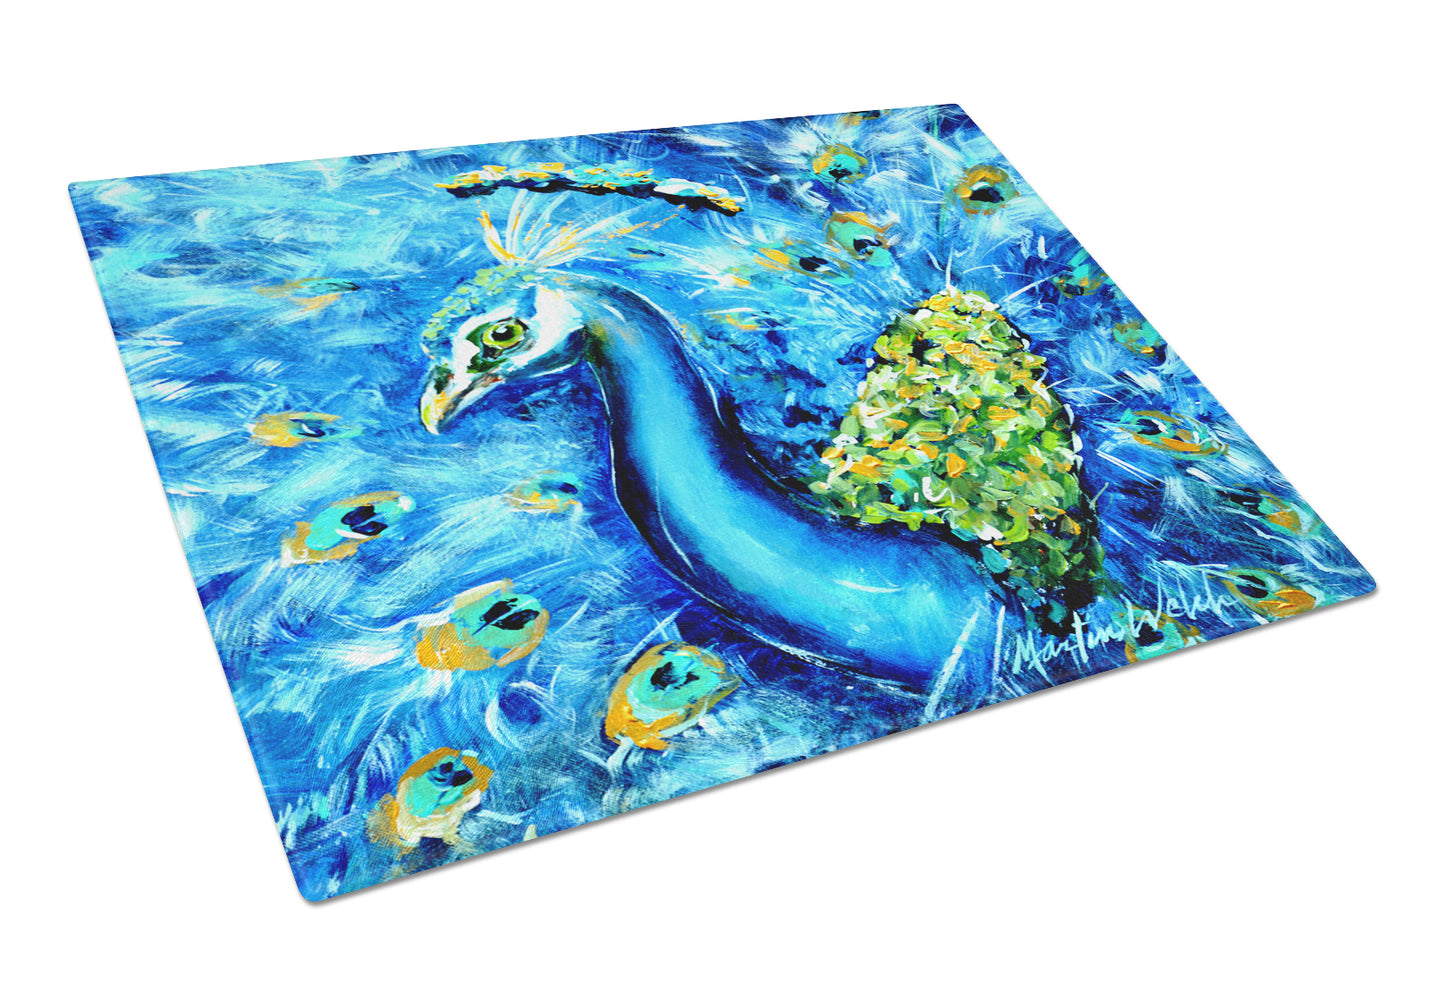 Buy this Peacock Straight Up in Blue Glass Cutting Board Large